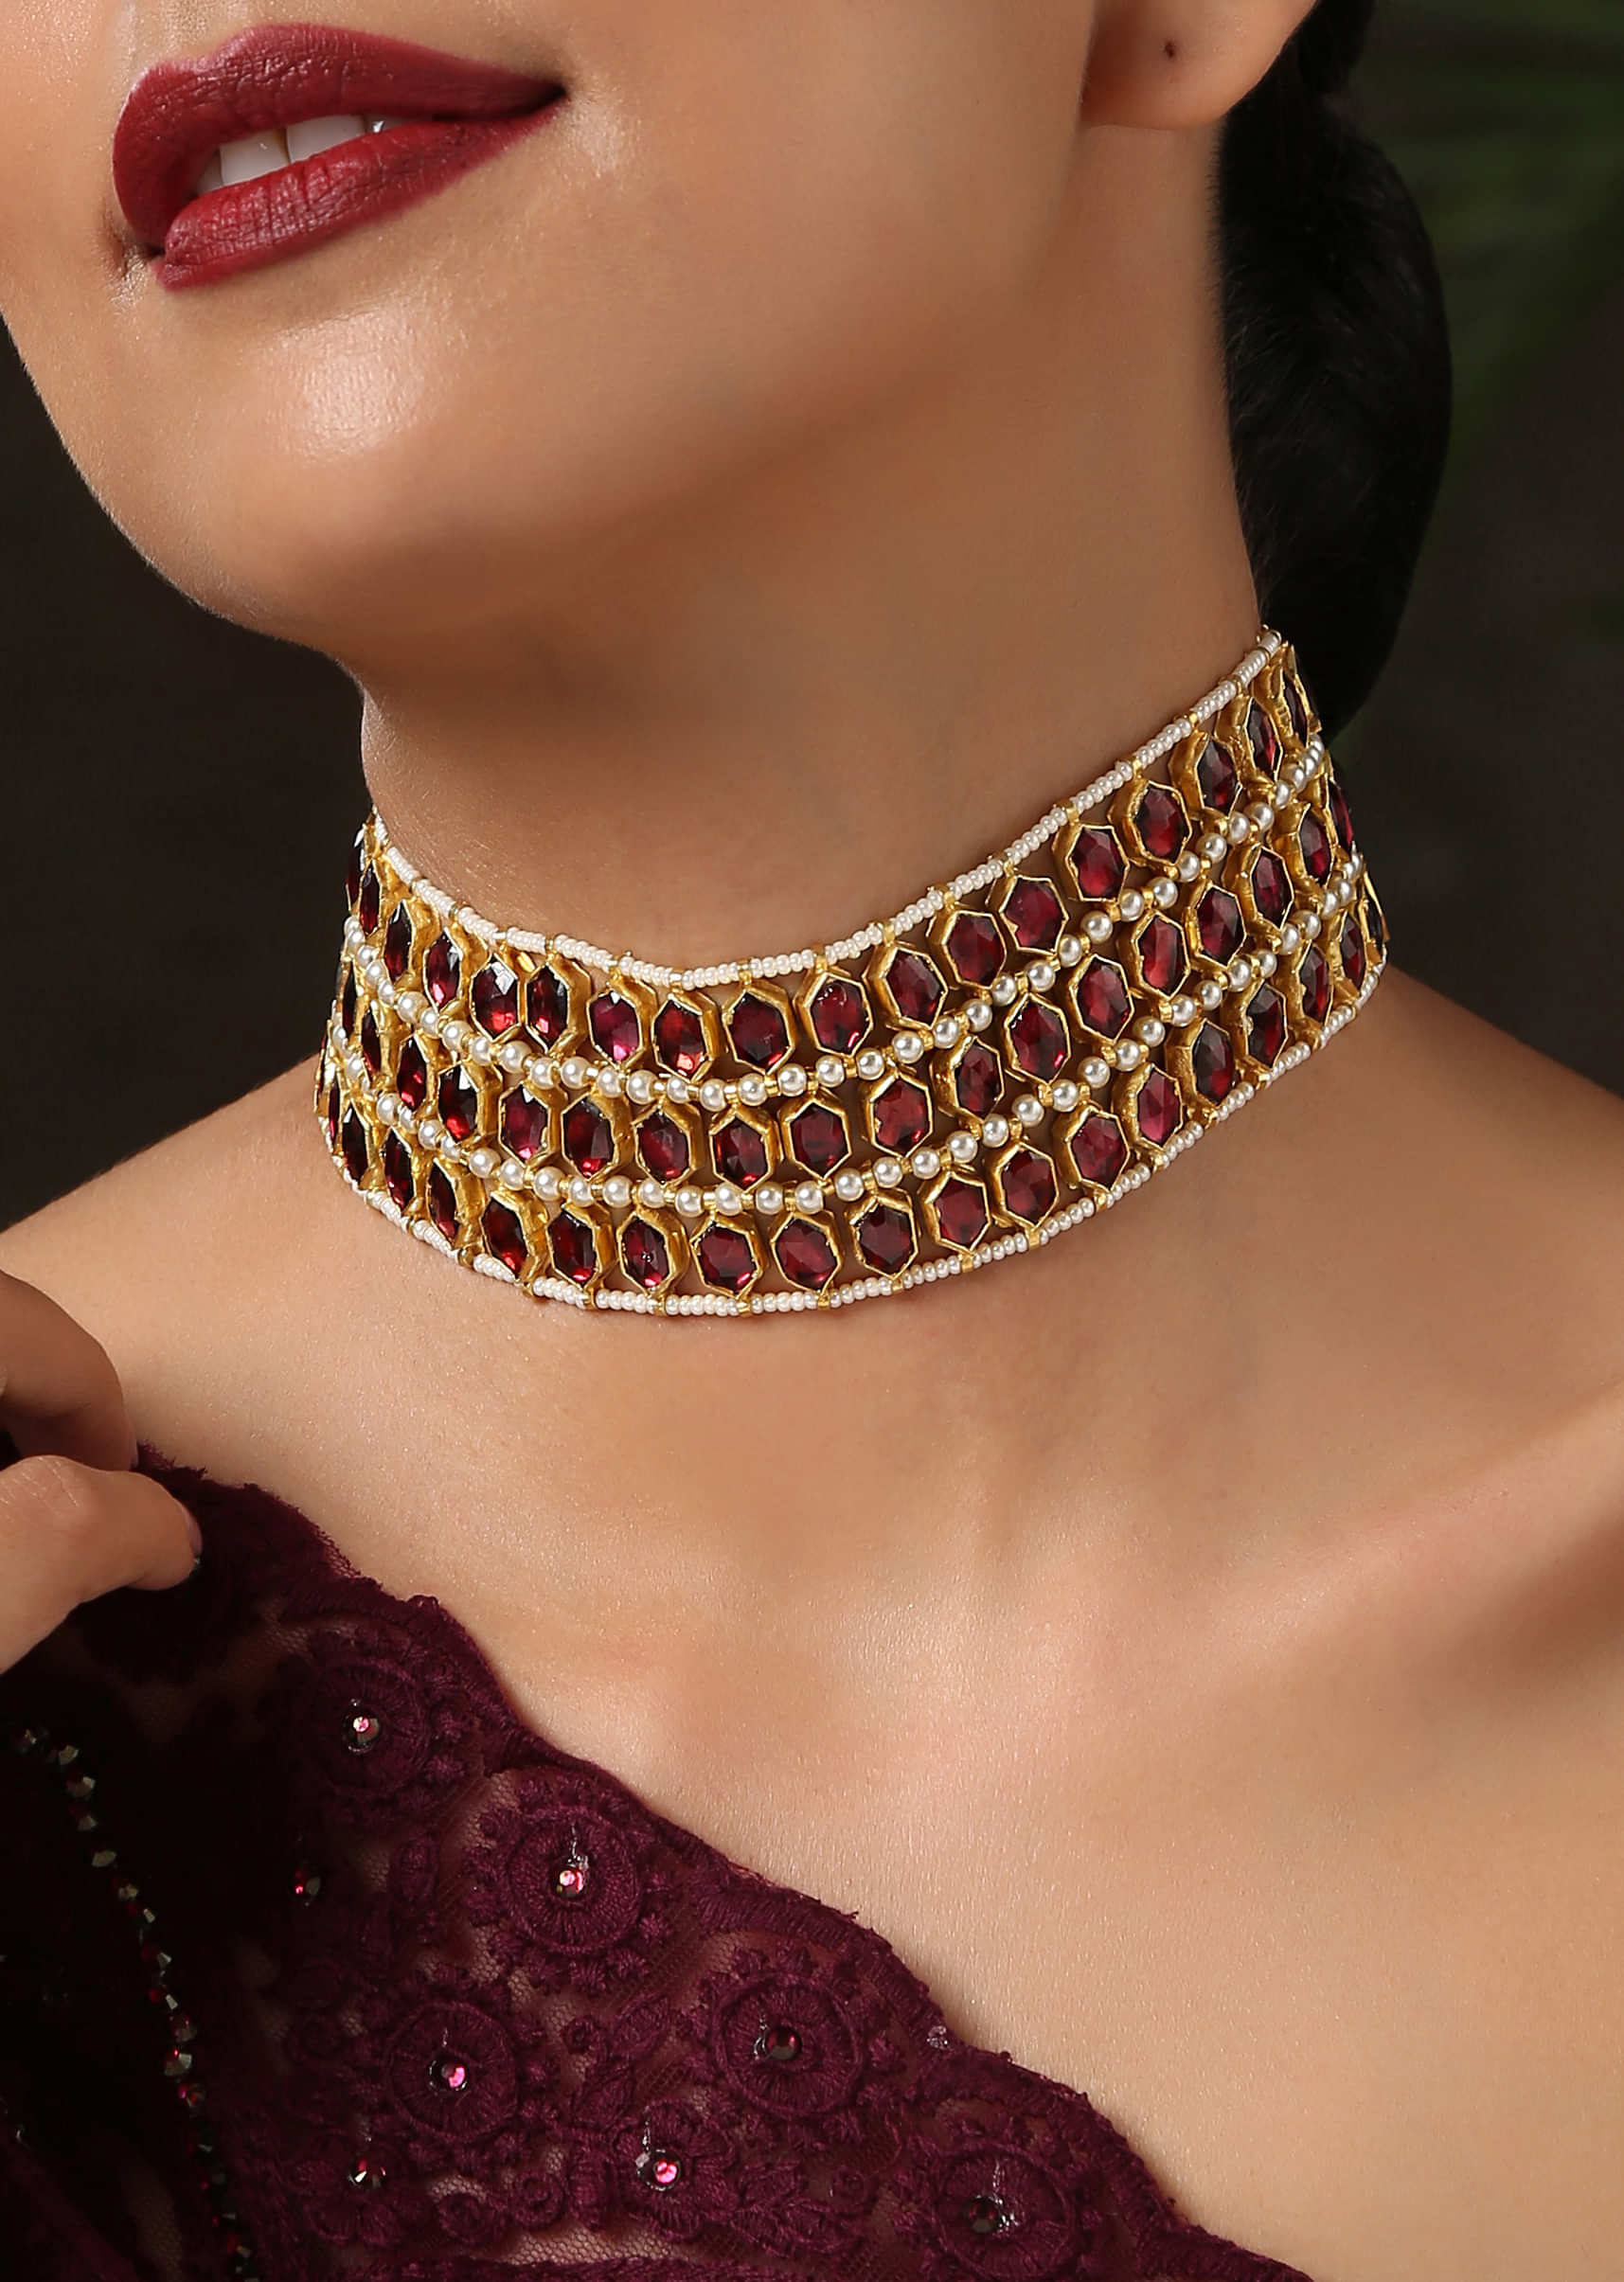 Red And Gold Choker Necklace With Four Rows Of Pearls And Hexagon Shaped Red Stones By Paisley Pop